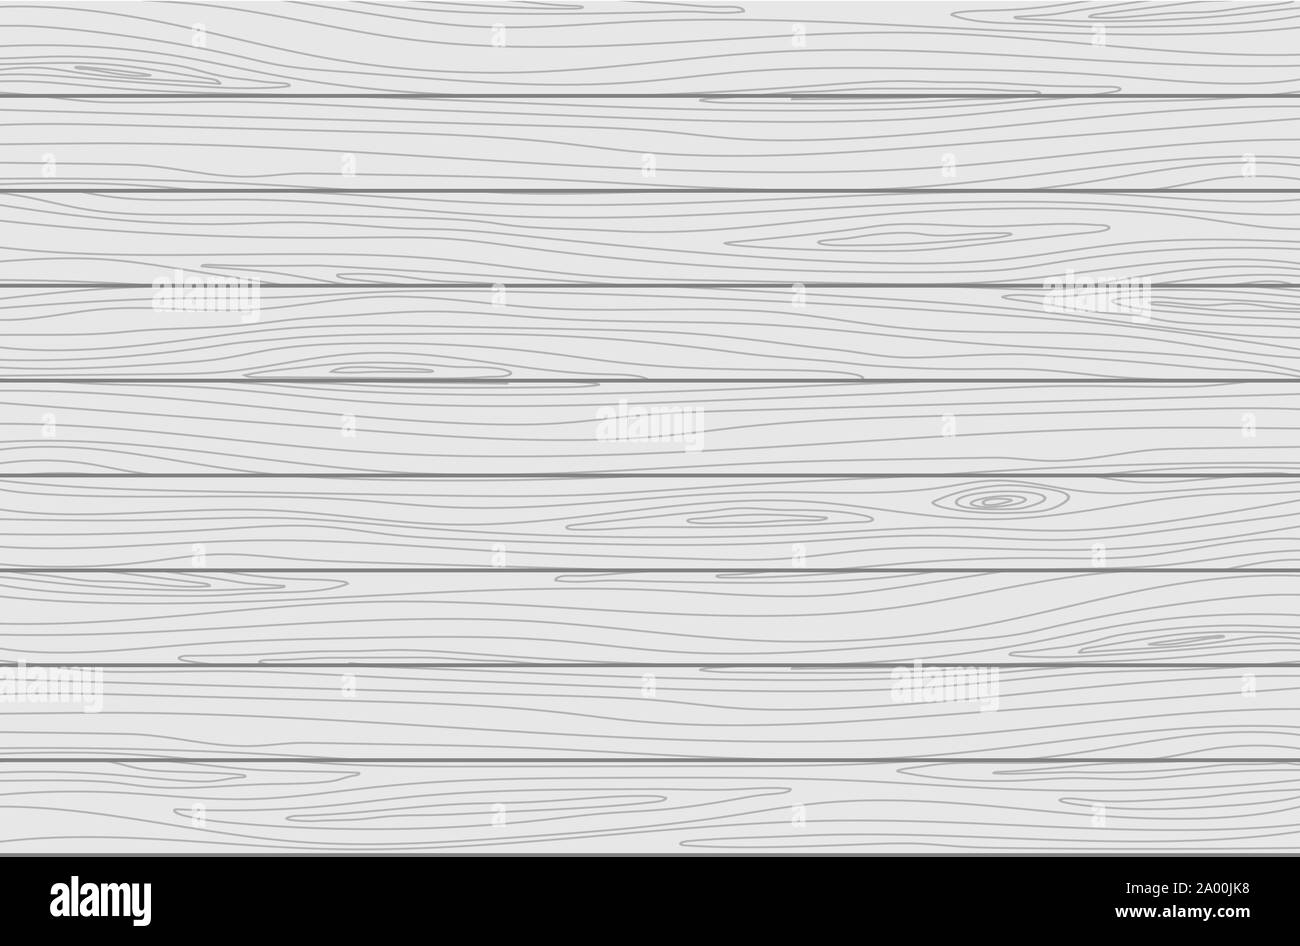 White wooden planks background. Vector texture Stock Vector